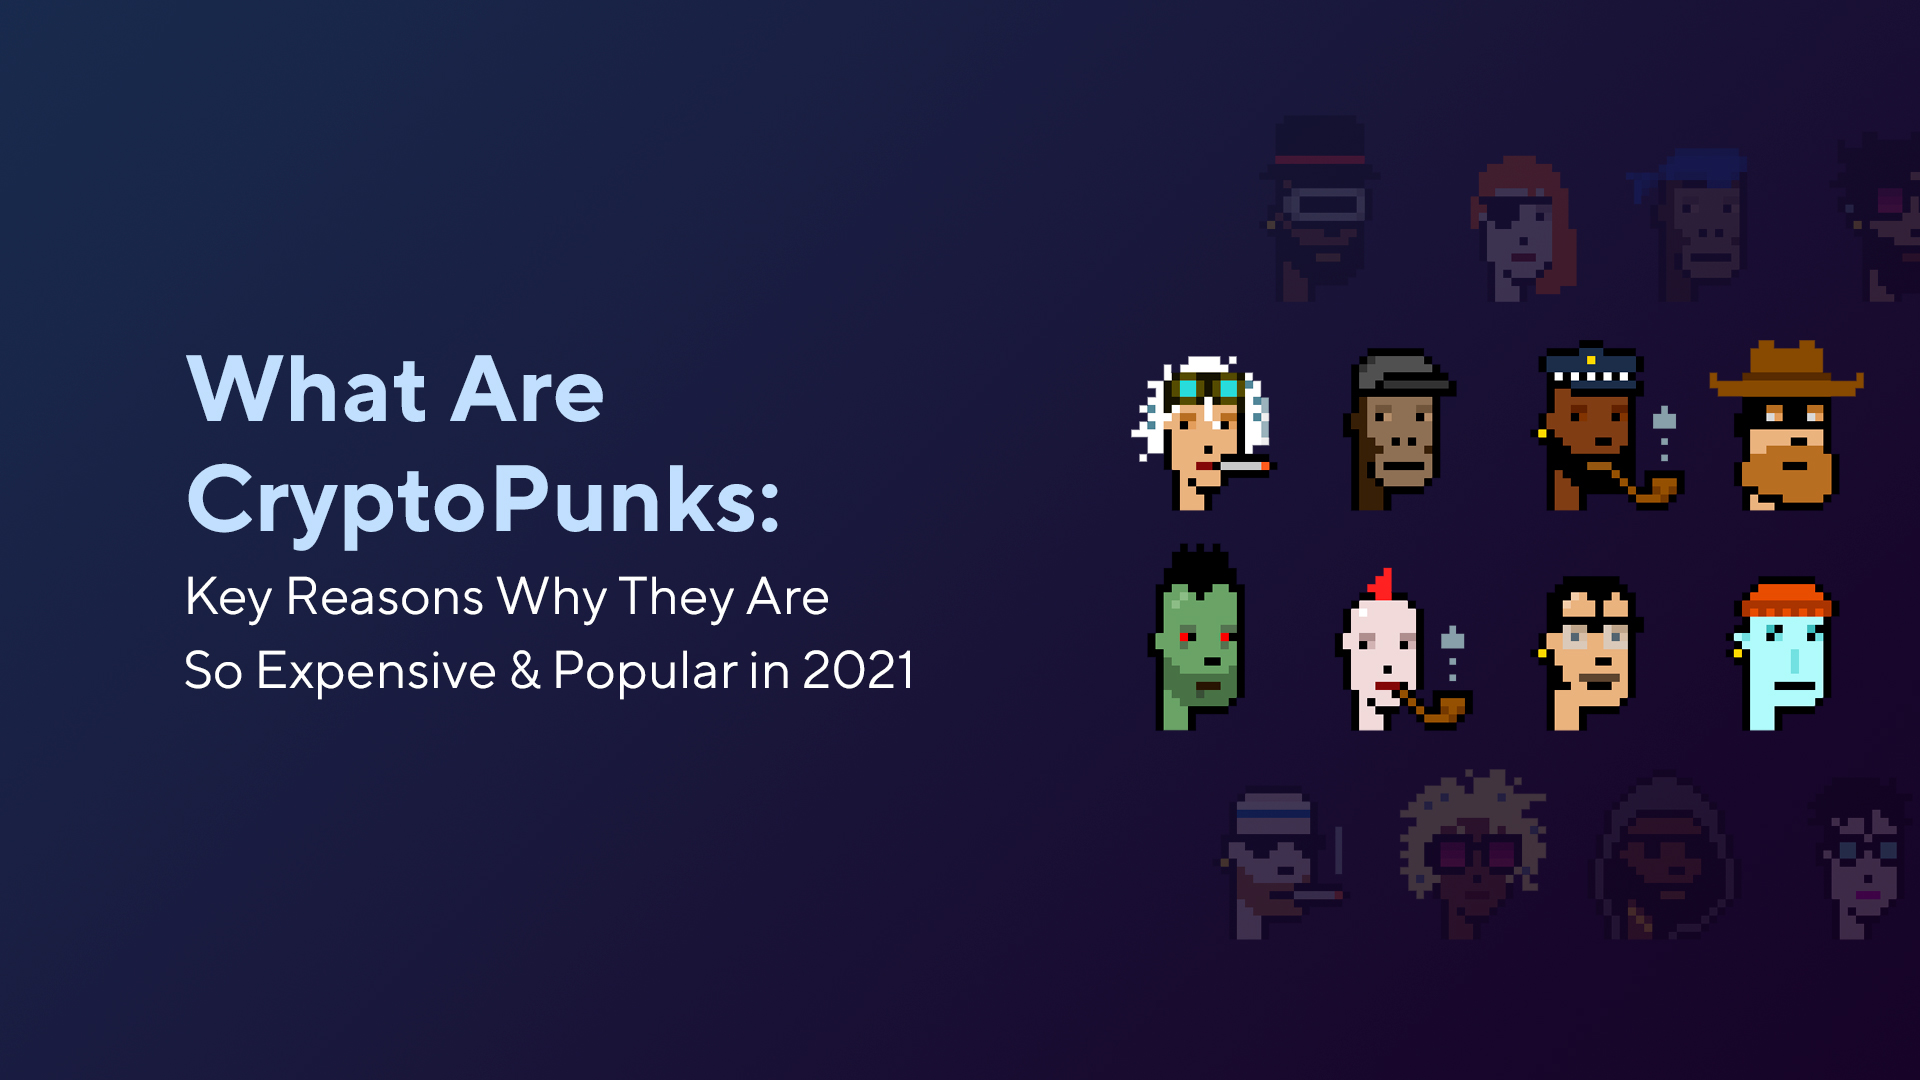 What Are CryptoPunks: Key Reasons Why They Are So Expensive & Popular in 2022